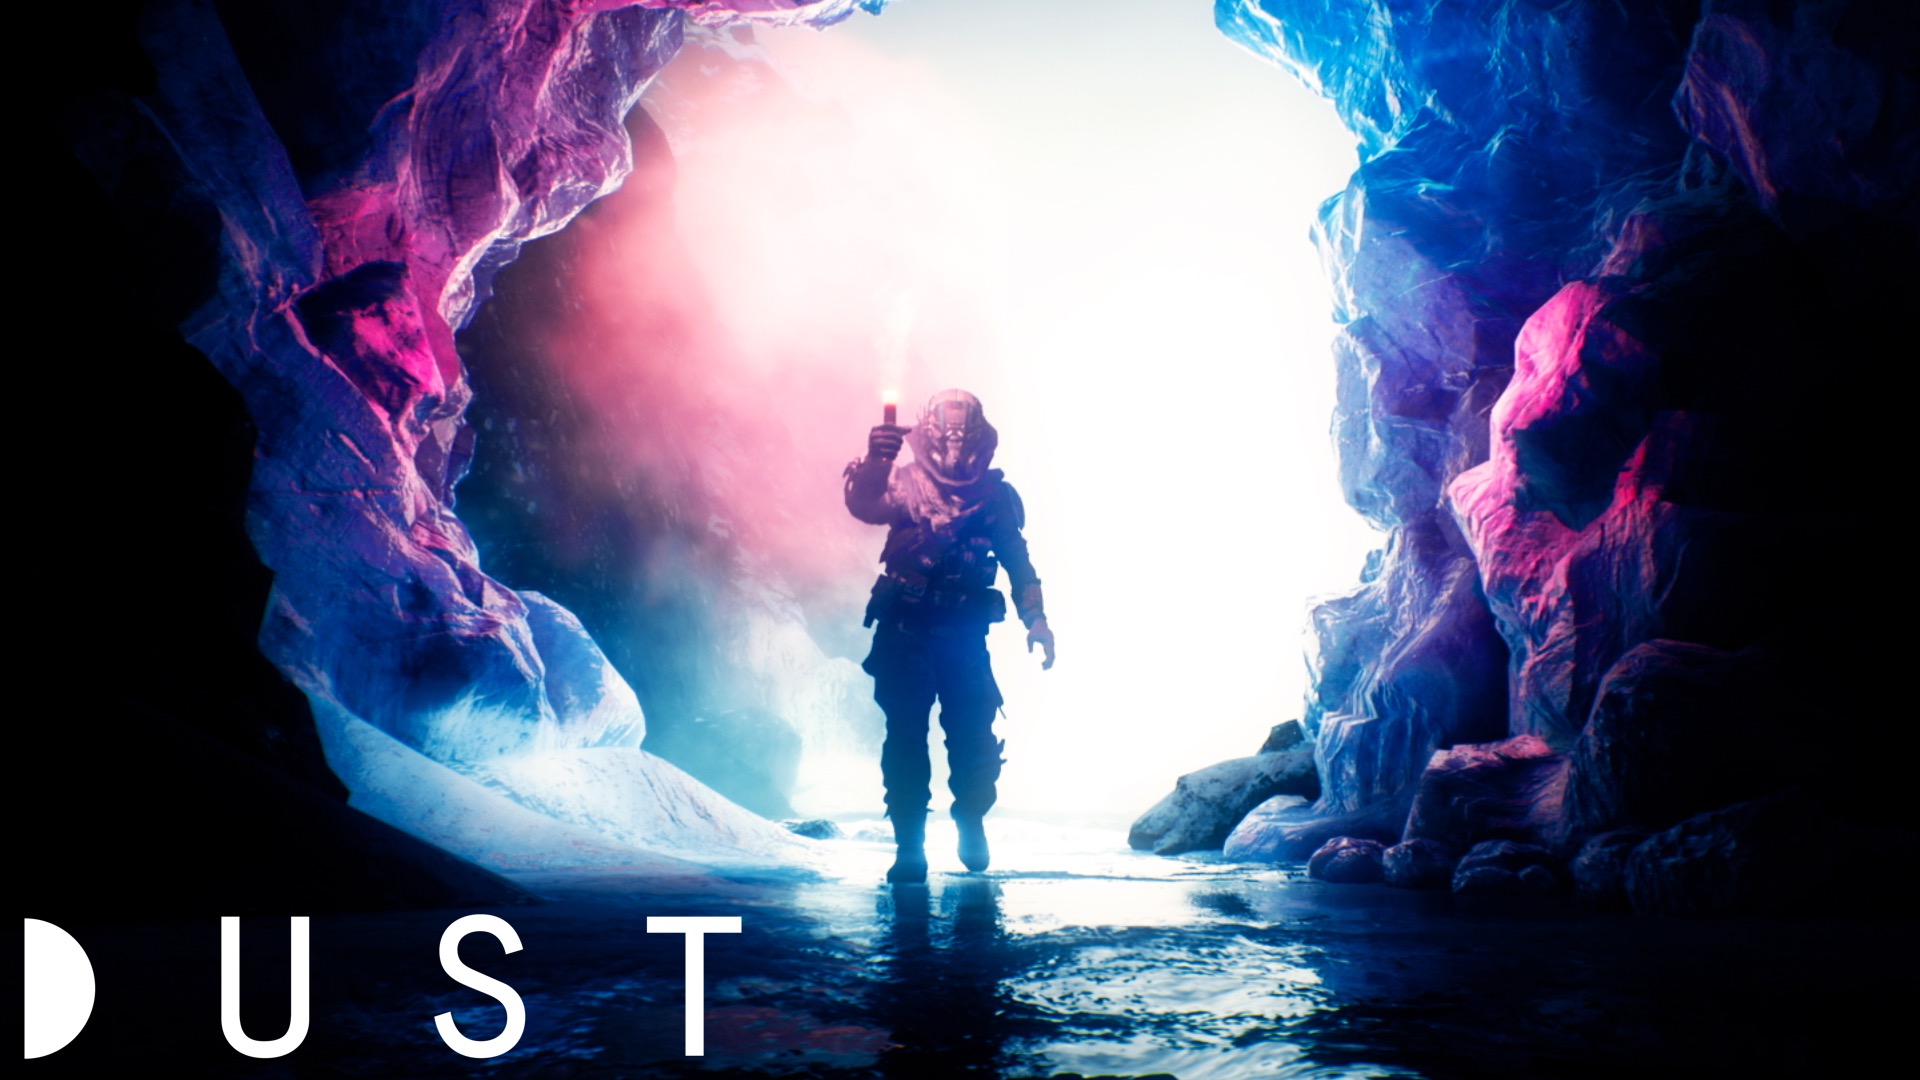 Sci-Fi Channel DUSTx Expands to More Platforms in US and UK